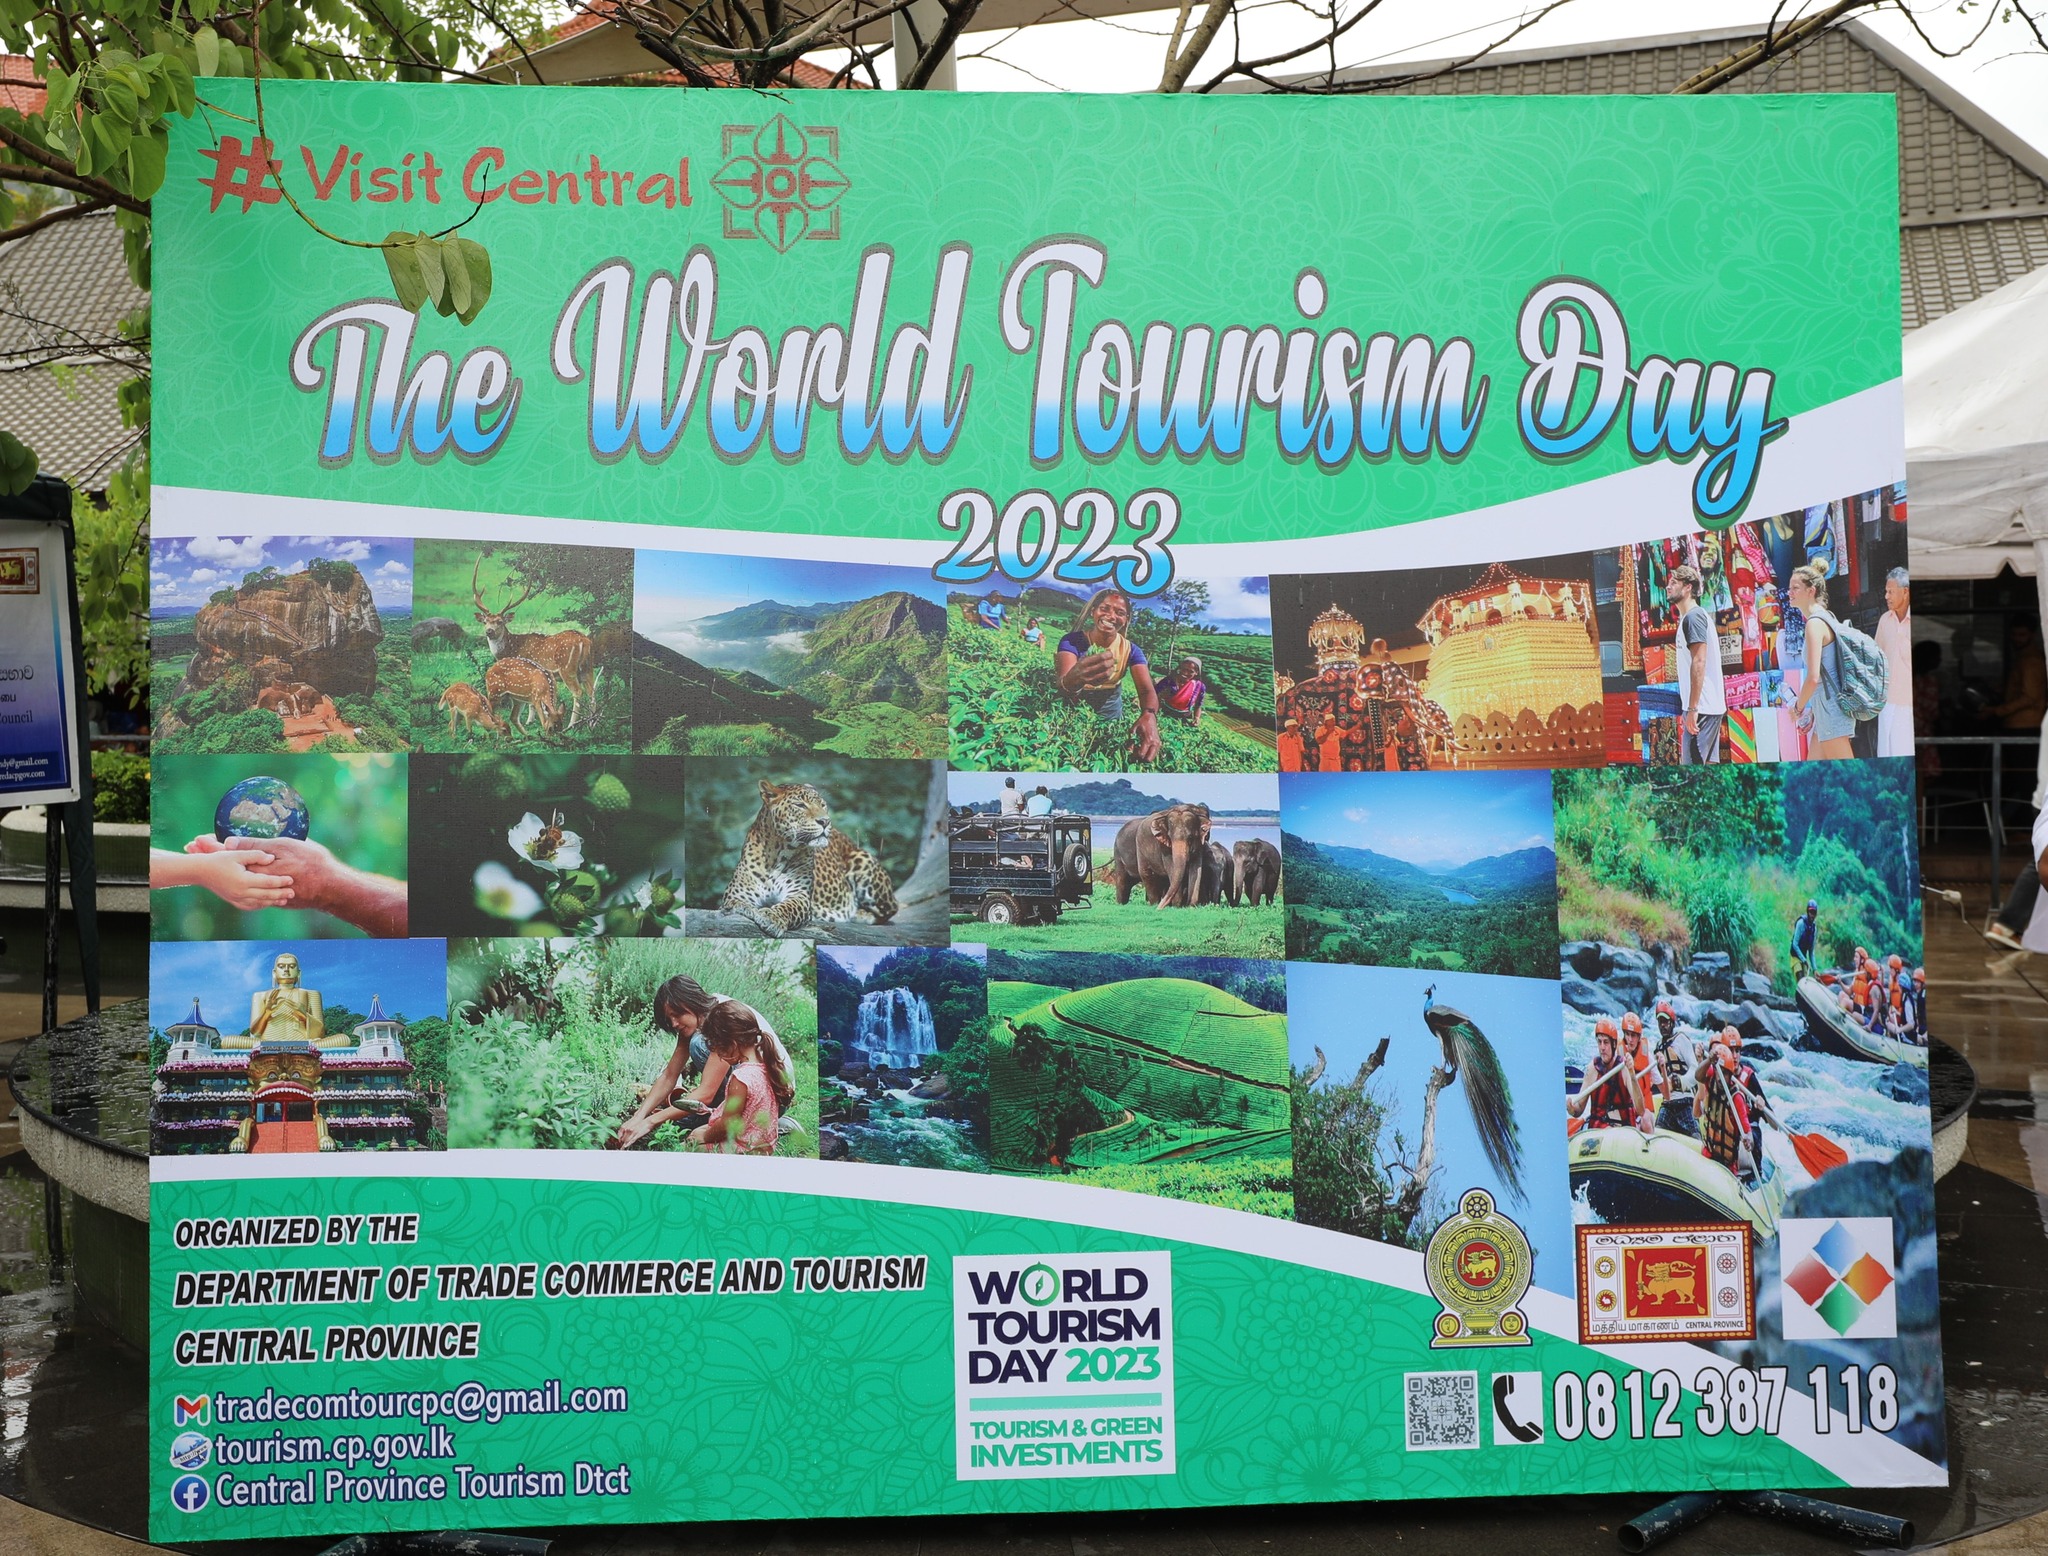 The World Tourism Day Trade Fair and Exhibition 